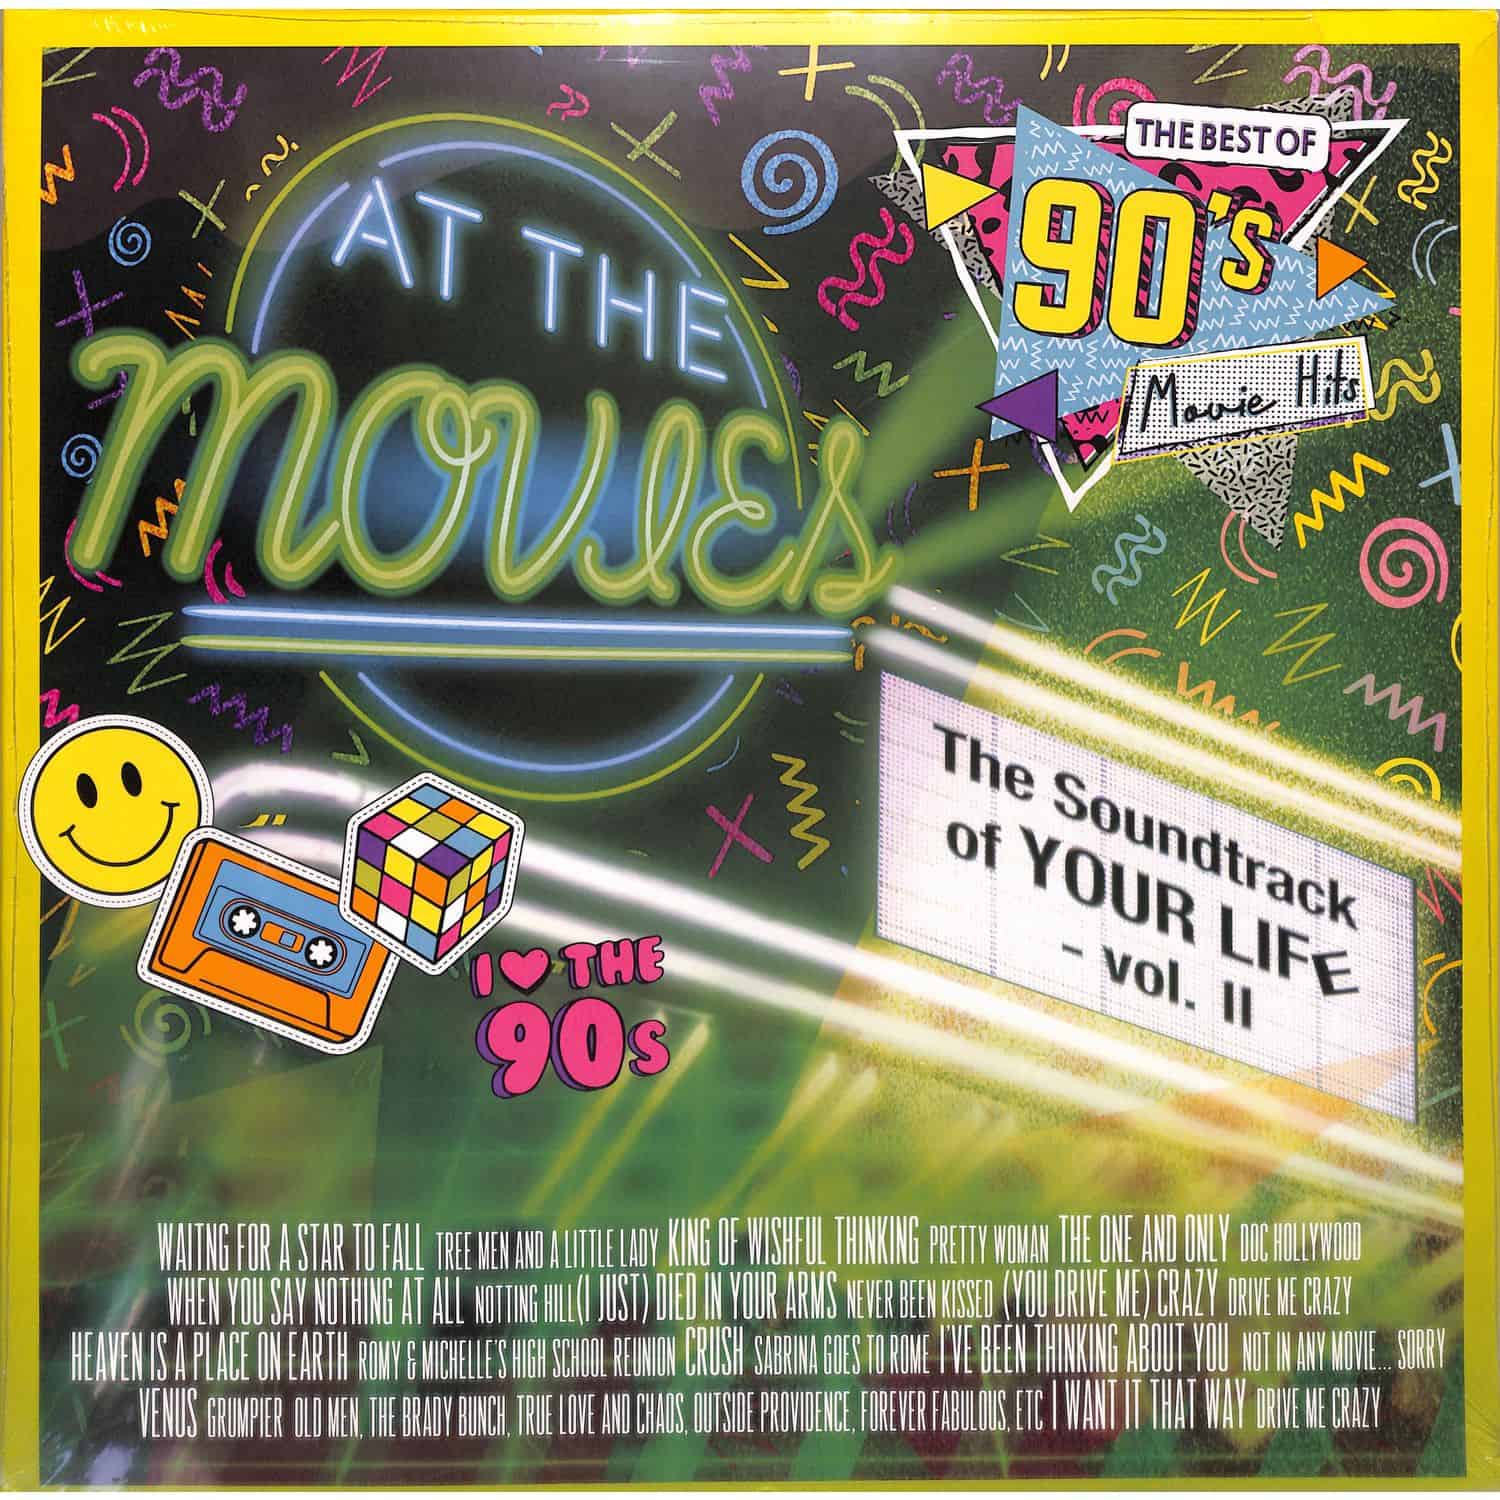 At The Movies - SOUNDTRACK OF YOUR LIFE-VOL.2 